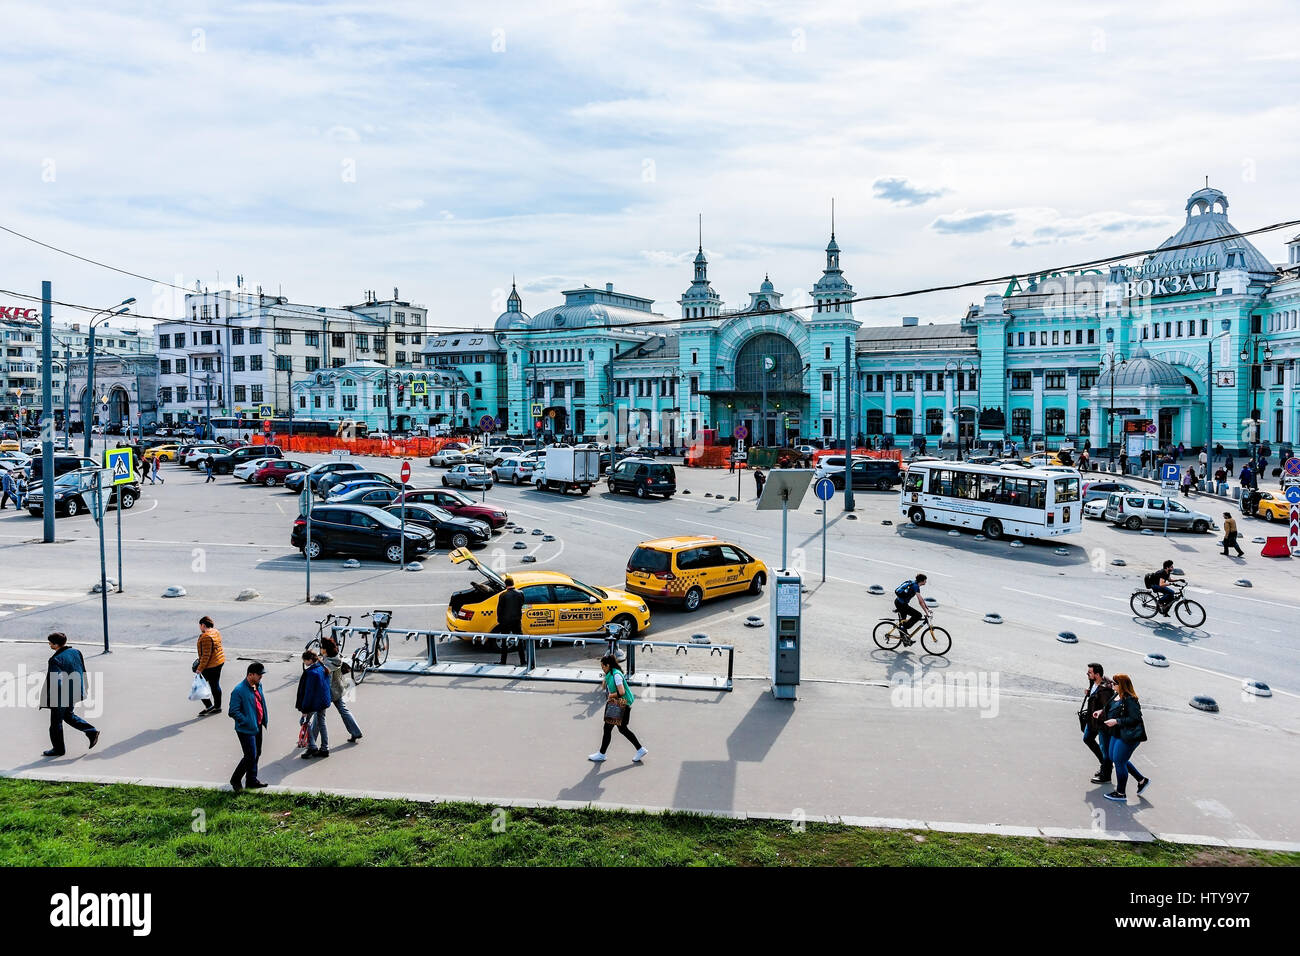 MOSCOW, RUSSIA - APRIL 29, 2016: Belorusskaya railway station and Tverskaya Zastava (outpost) square. The station serves long distance trains to the w Stock Photo